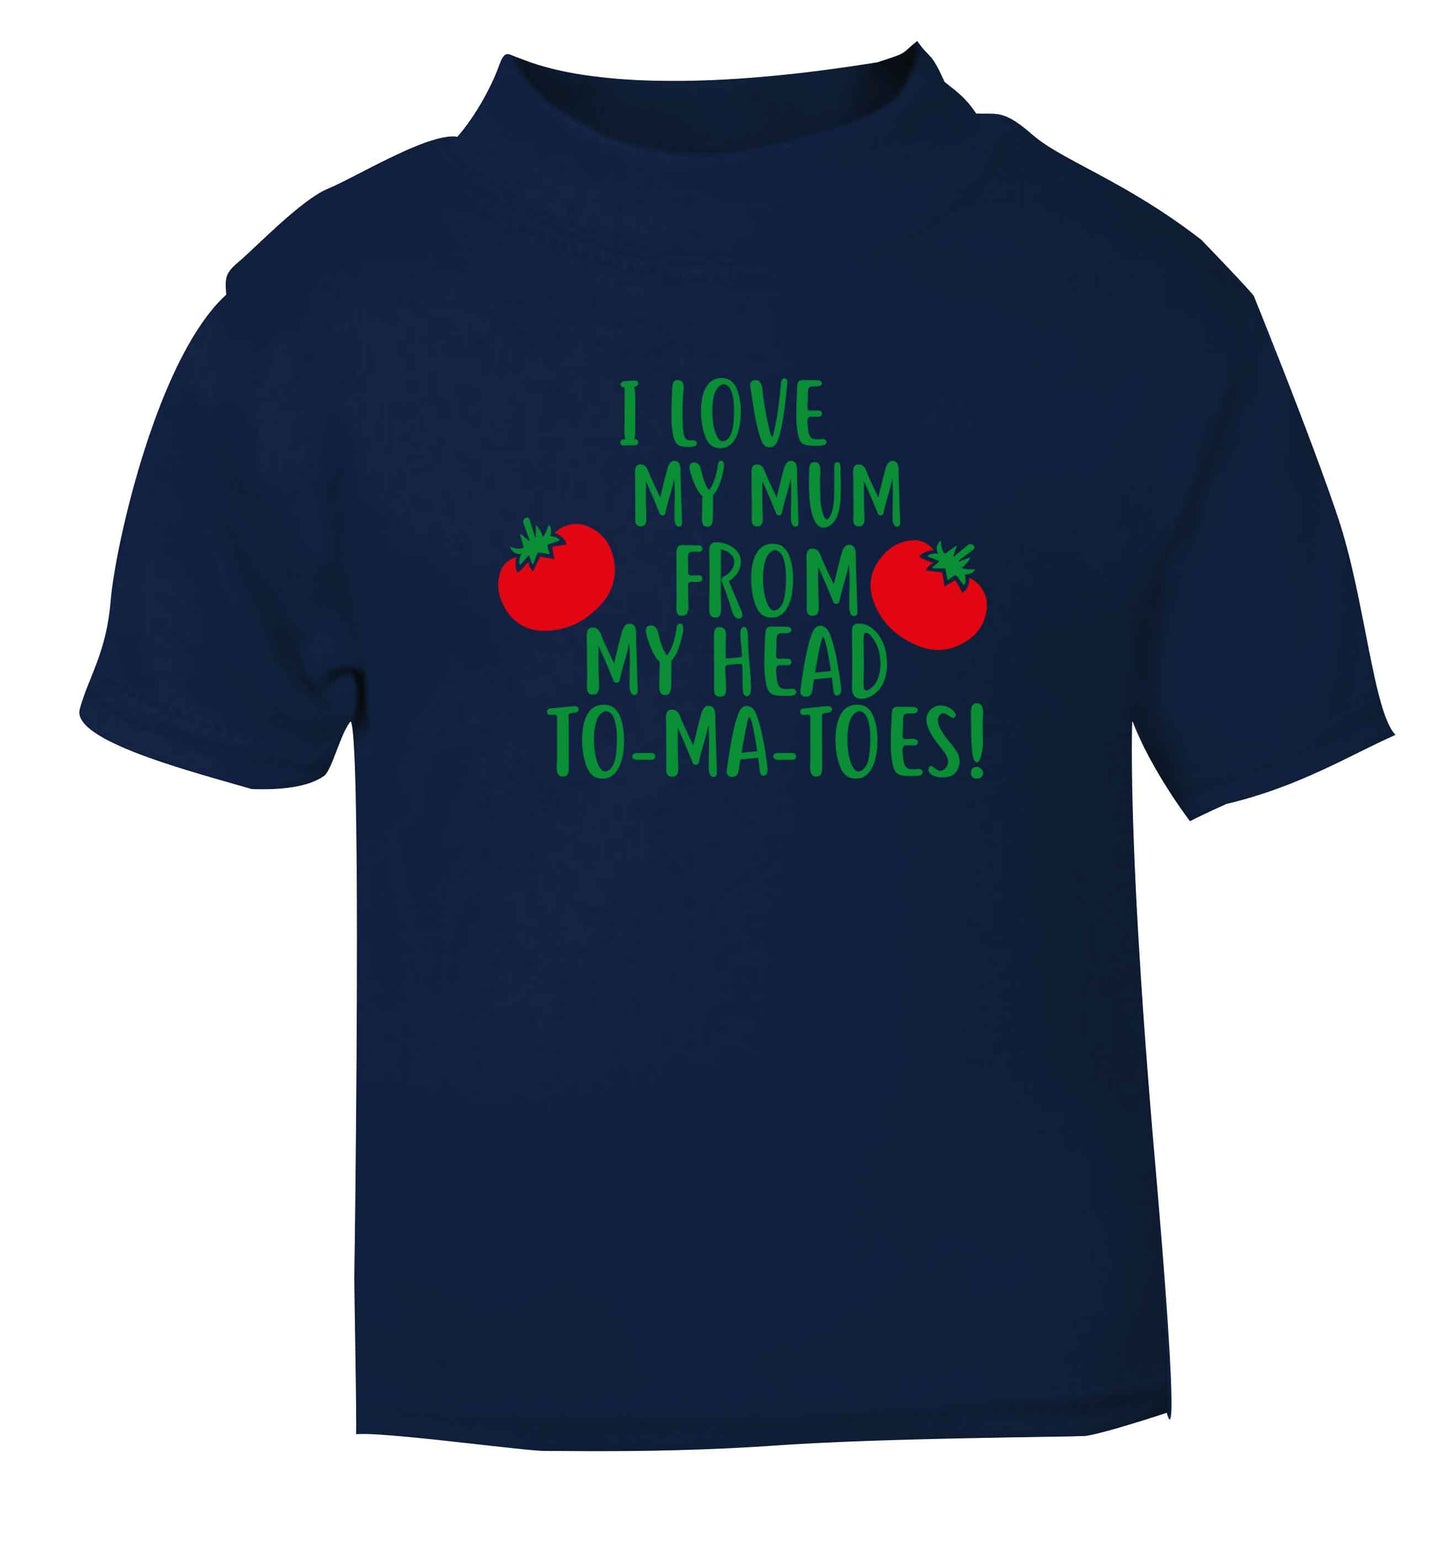 I love my mum from my head to-my-toes! navy baby toddler Tshirt 2 Years